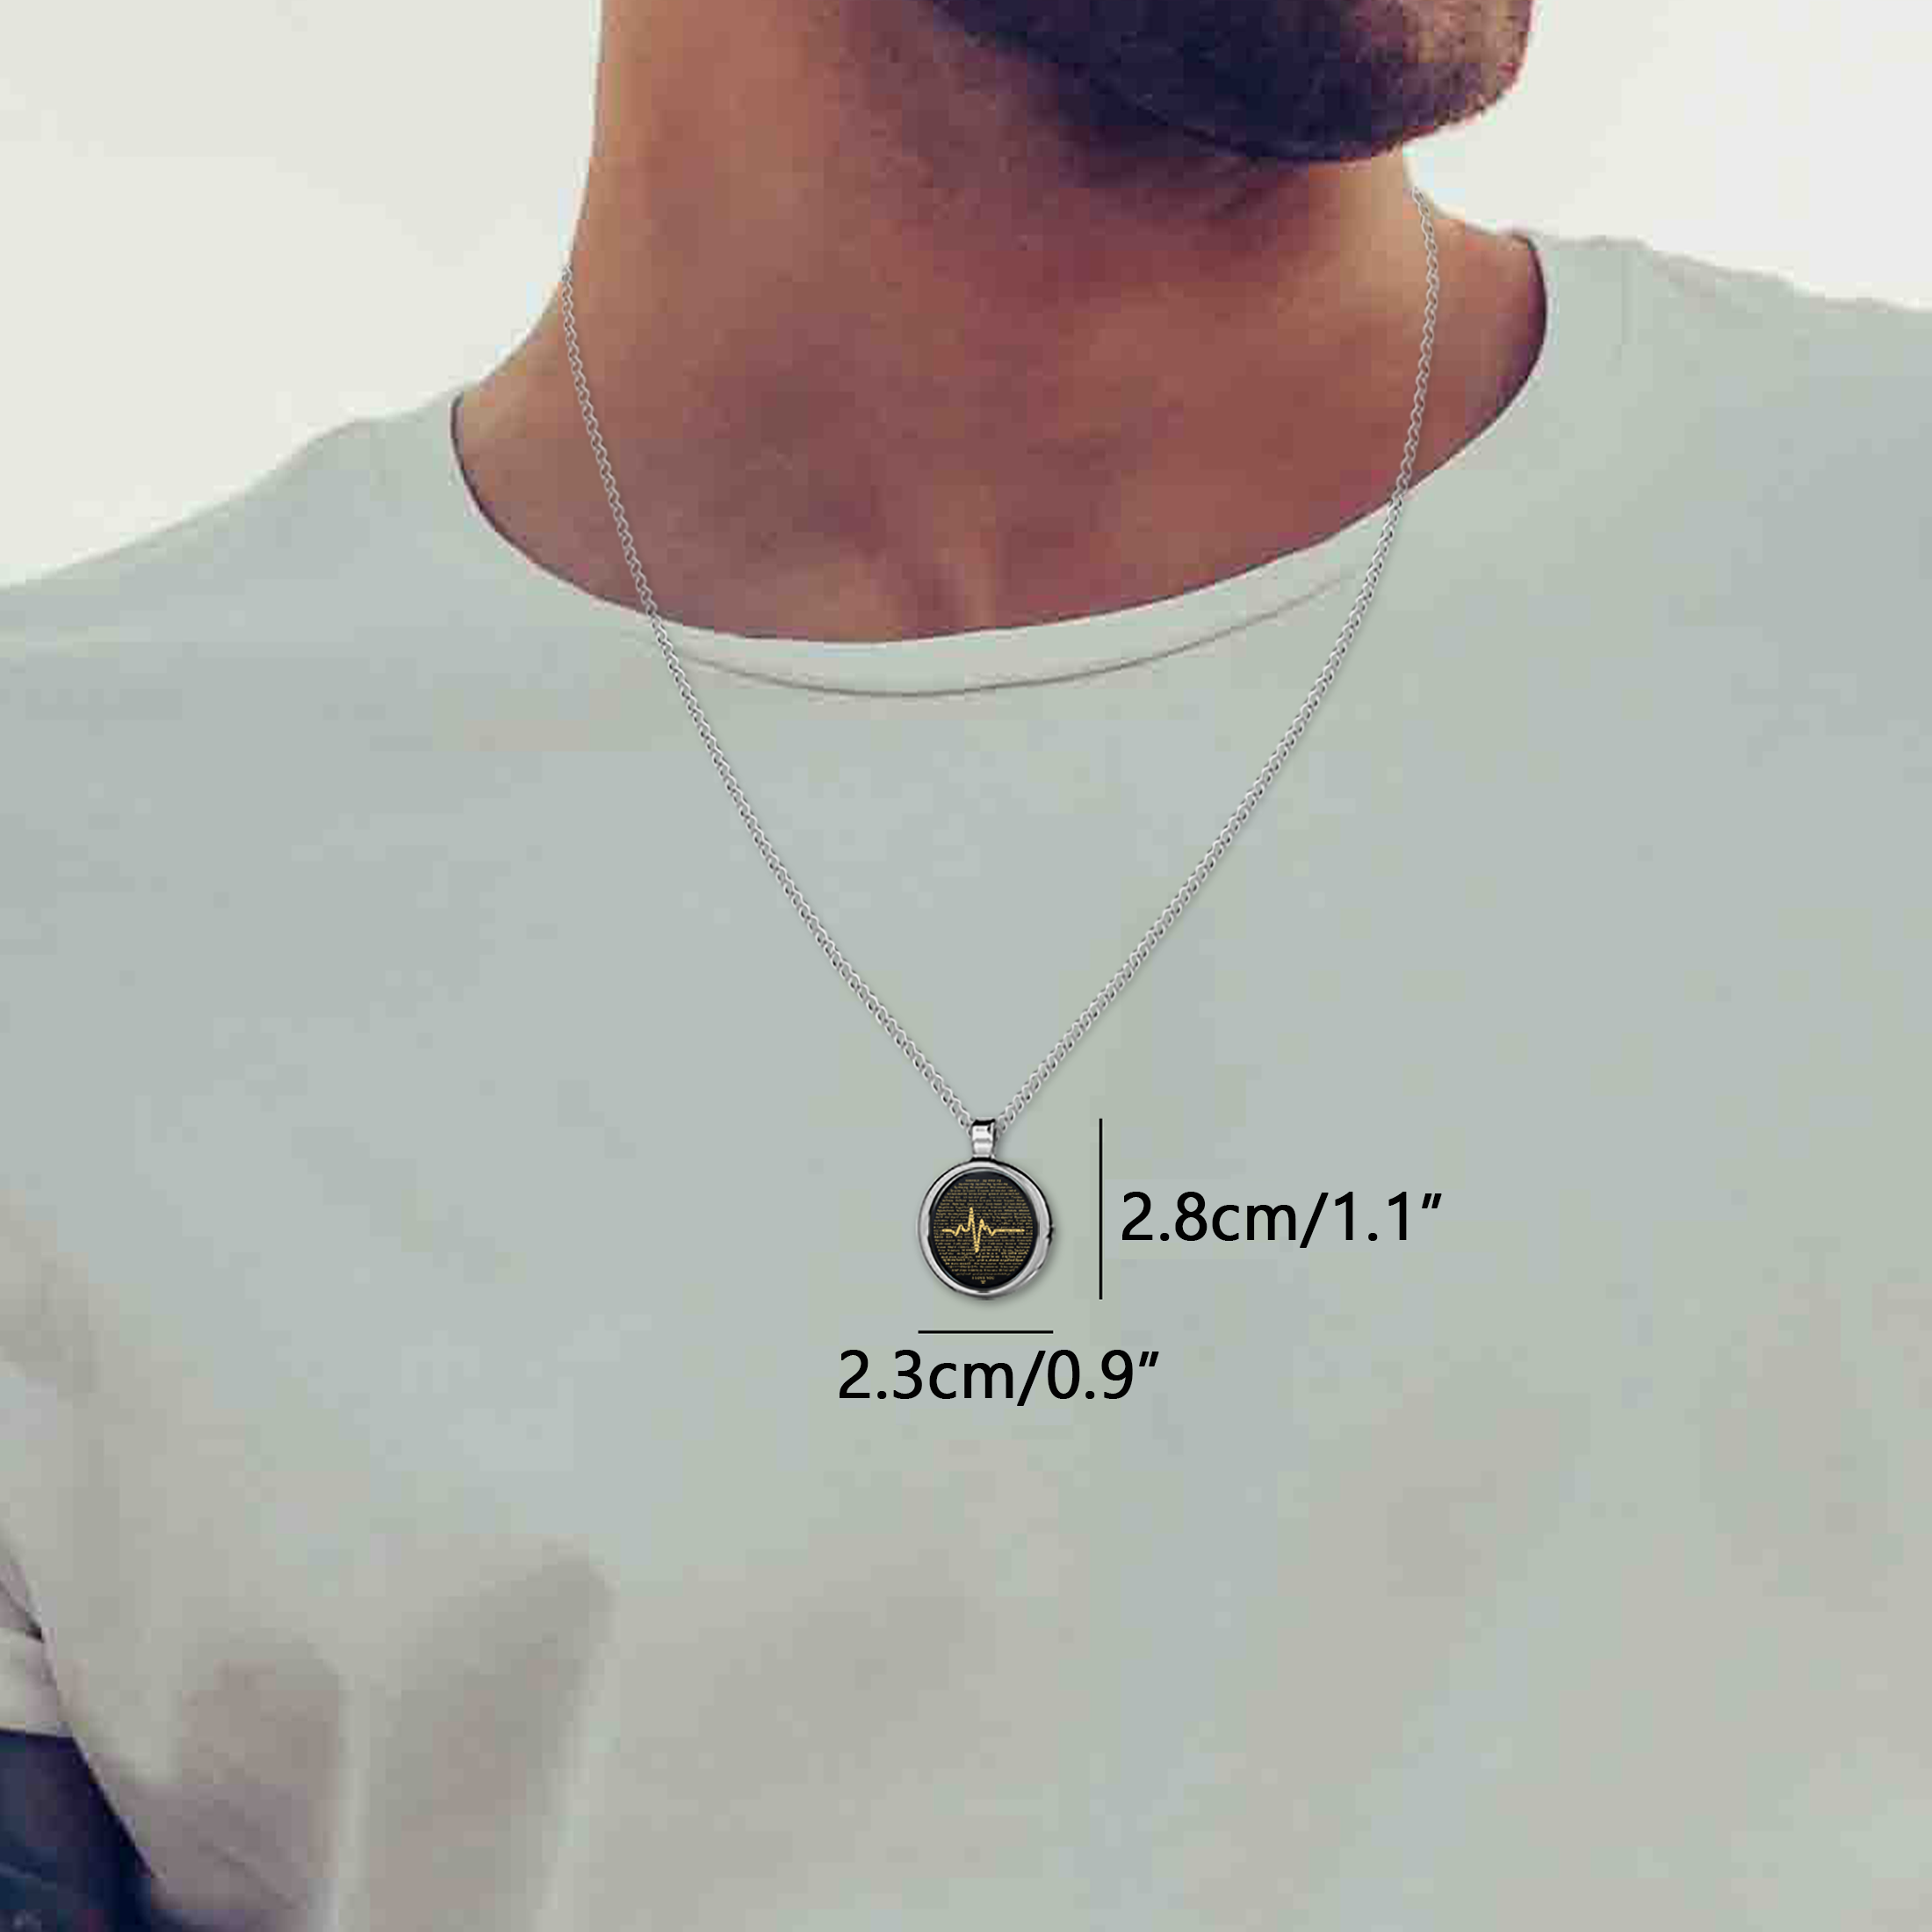 An ornate His Heartbeat of Love Necklace Over 100 Languages I Love You Pendant with golden text in various languages and scripts expressing "I Love You" on a textured background, making it a romantic gift.